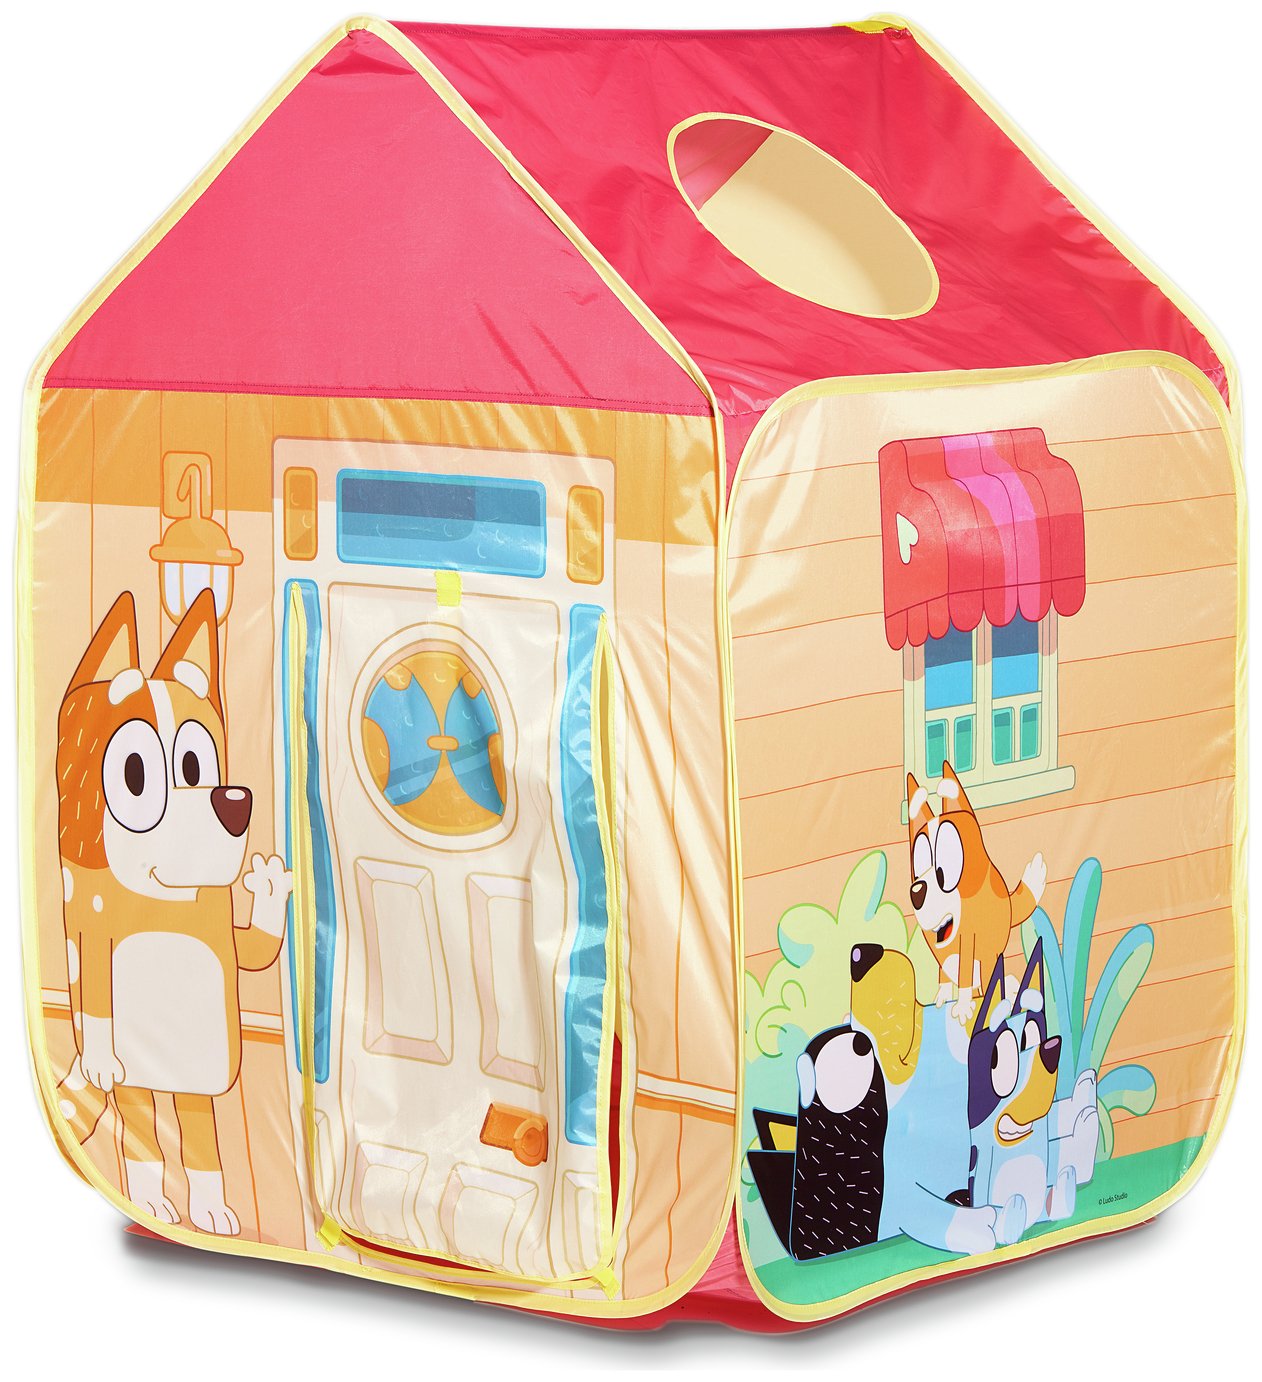 Bluey Pop Up Play House Play Tent